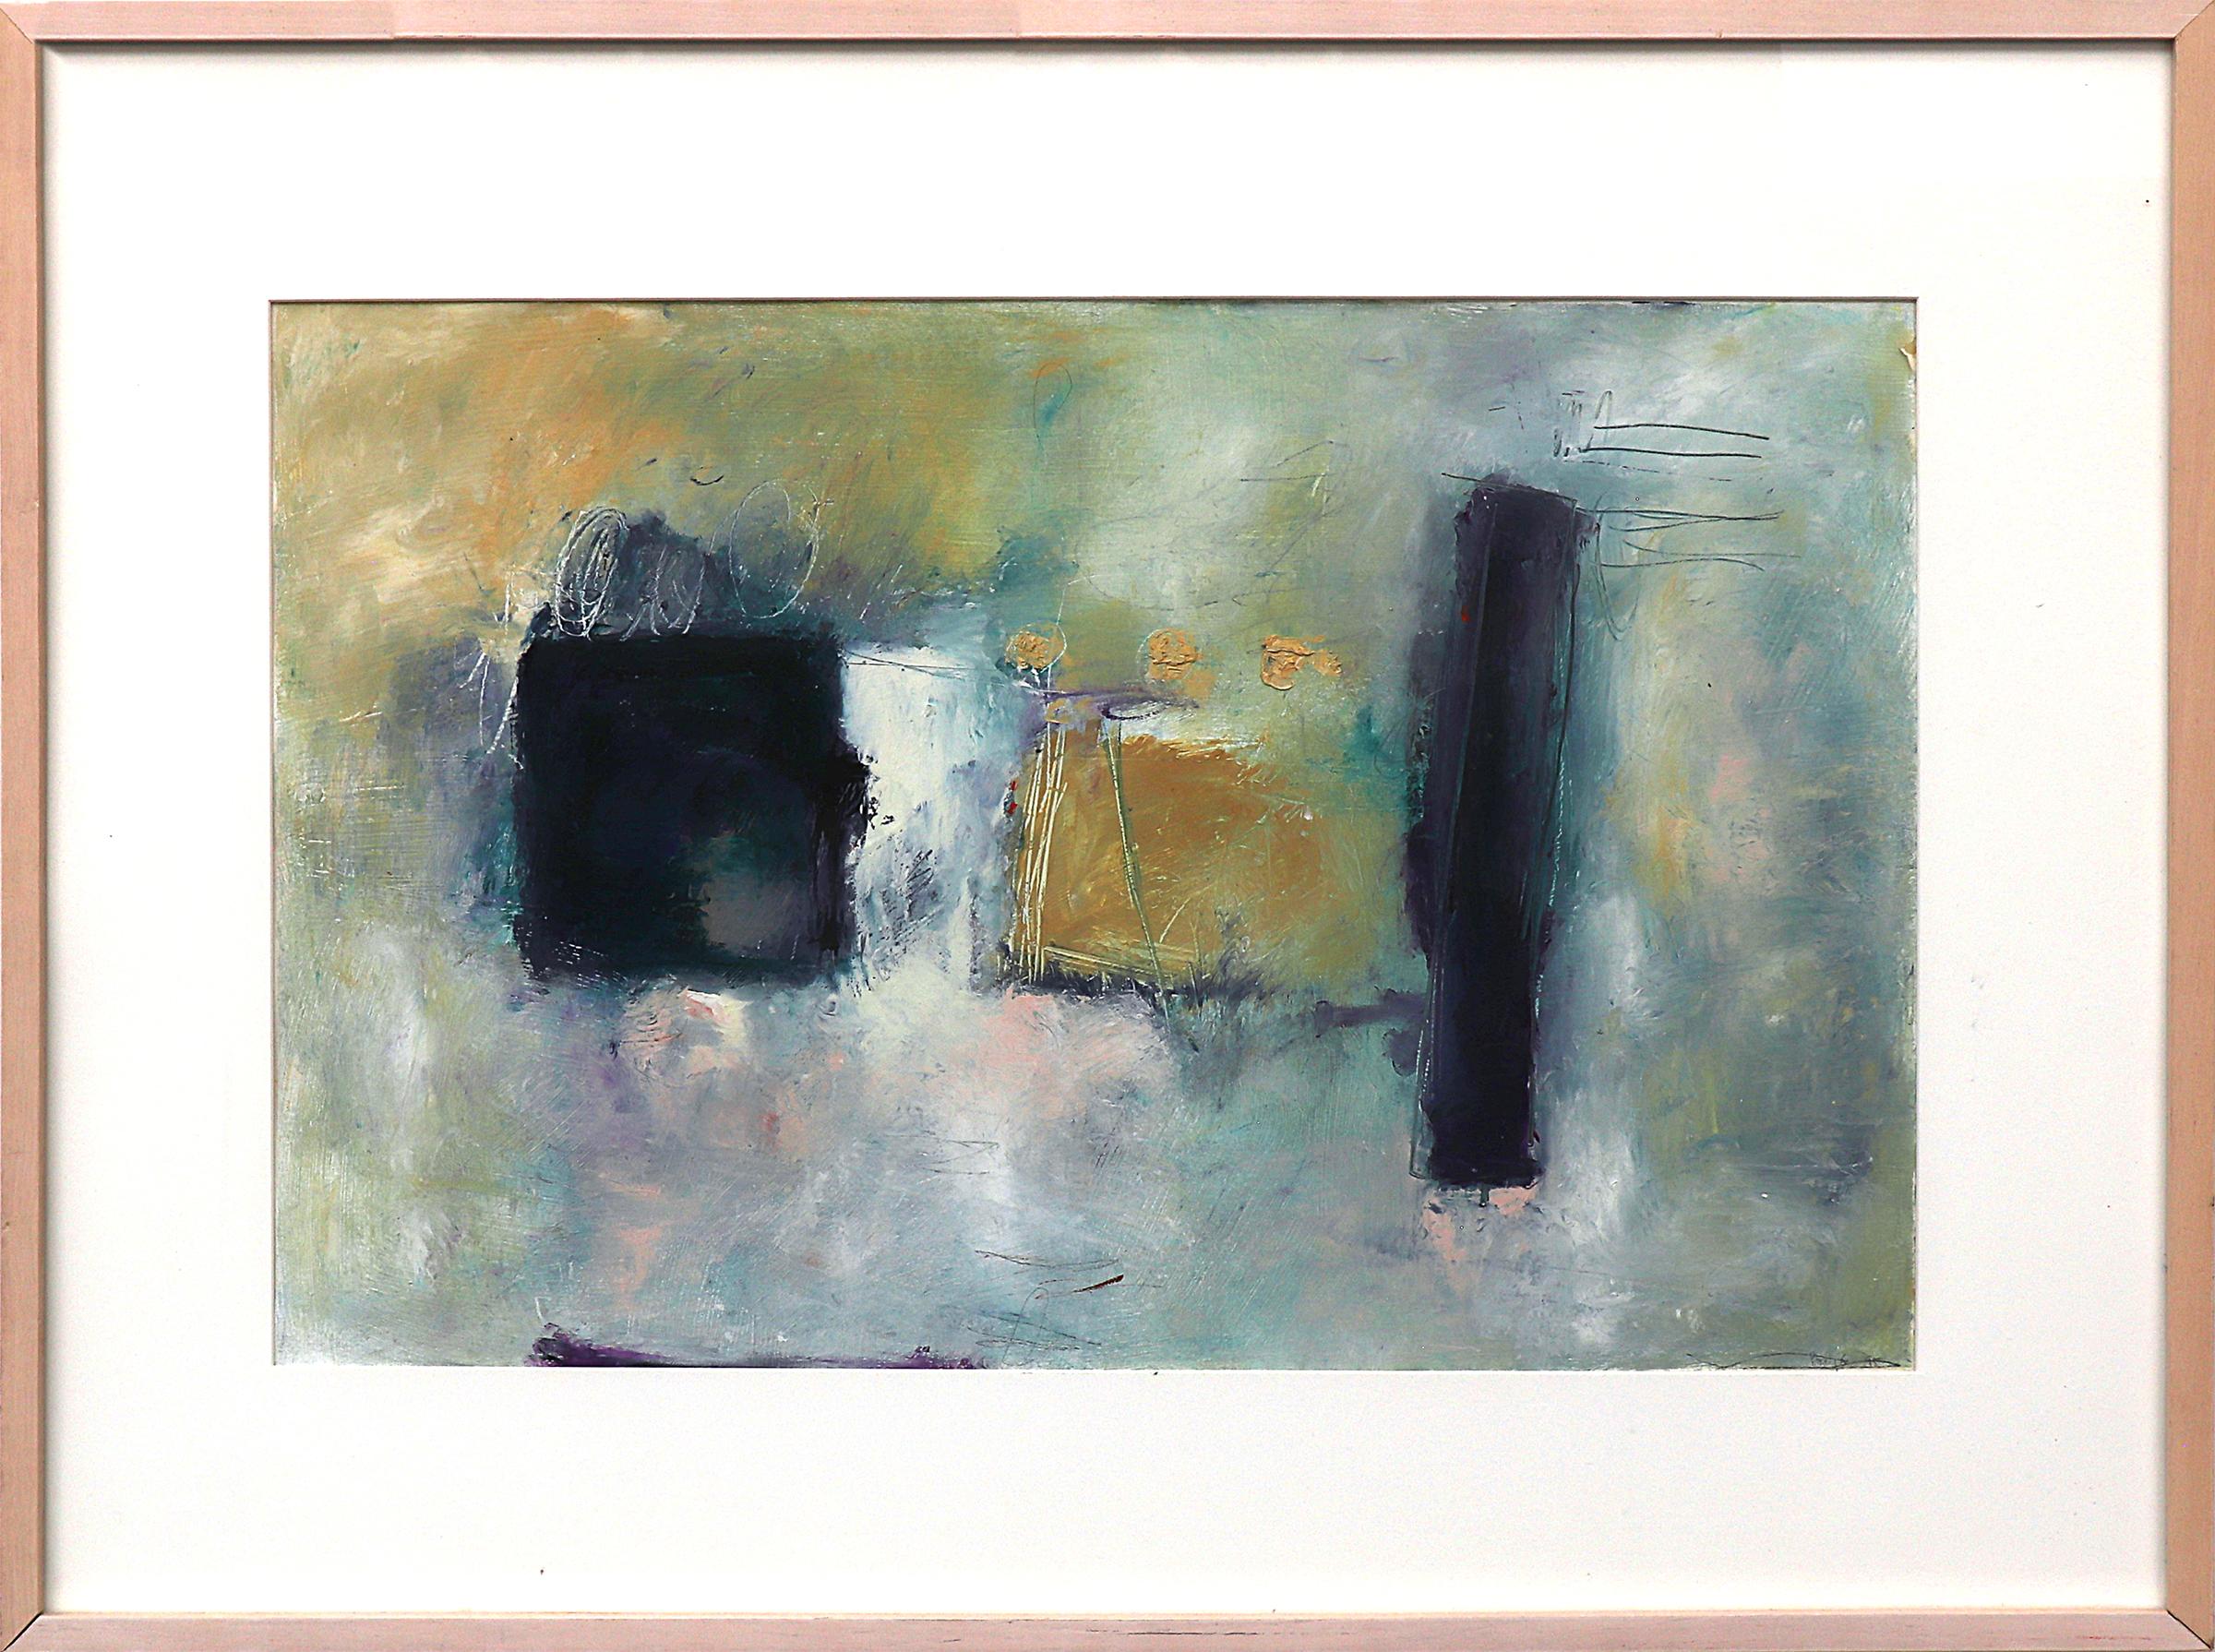 Bonney Goldstein Abstract Painting - "Composition #1,  1990s Abstract Oil Painting in Blue, Violet, Gold, Teal & Pink